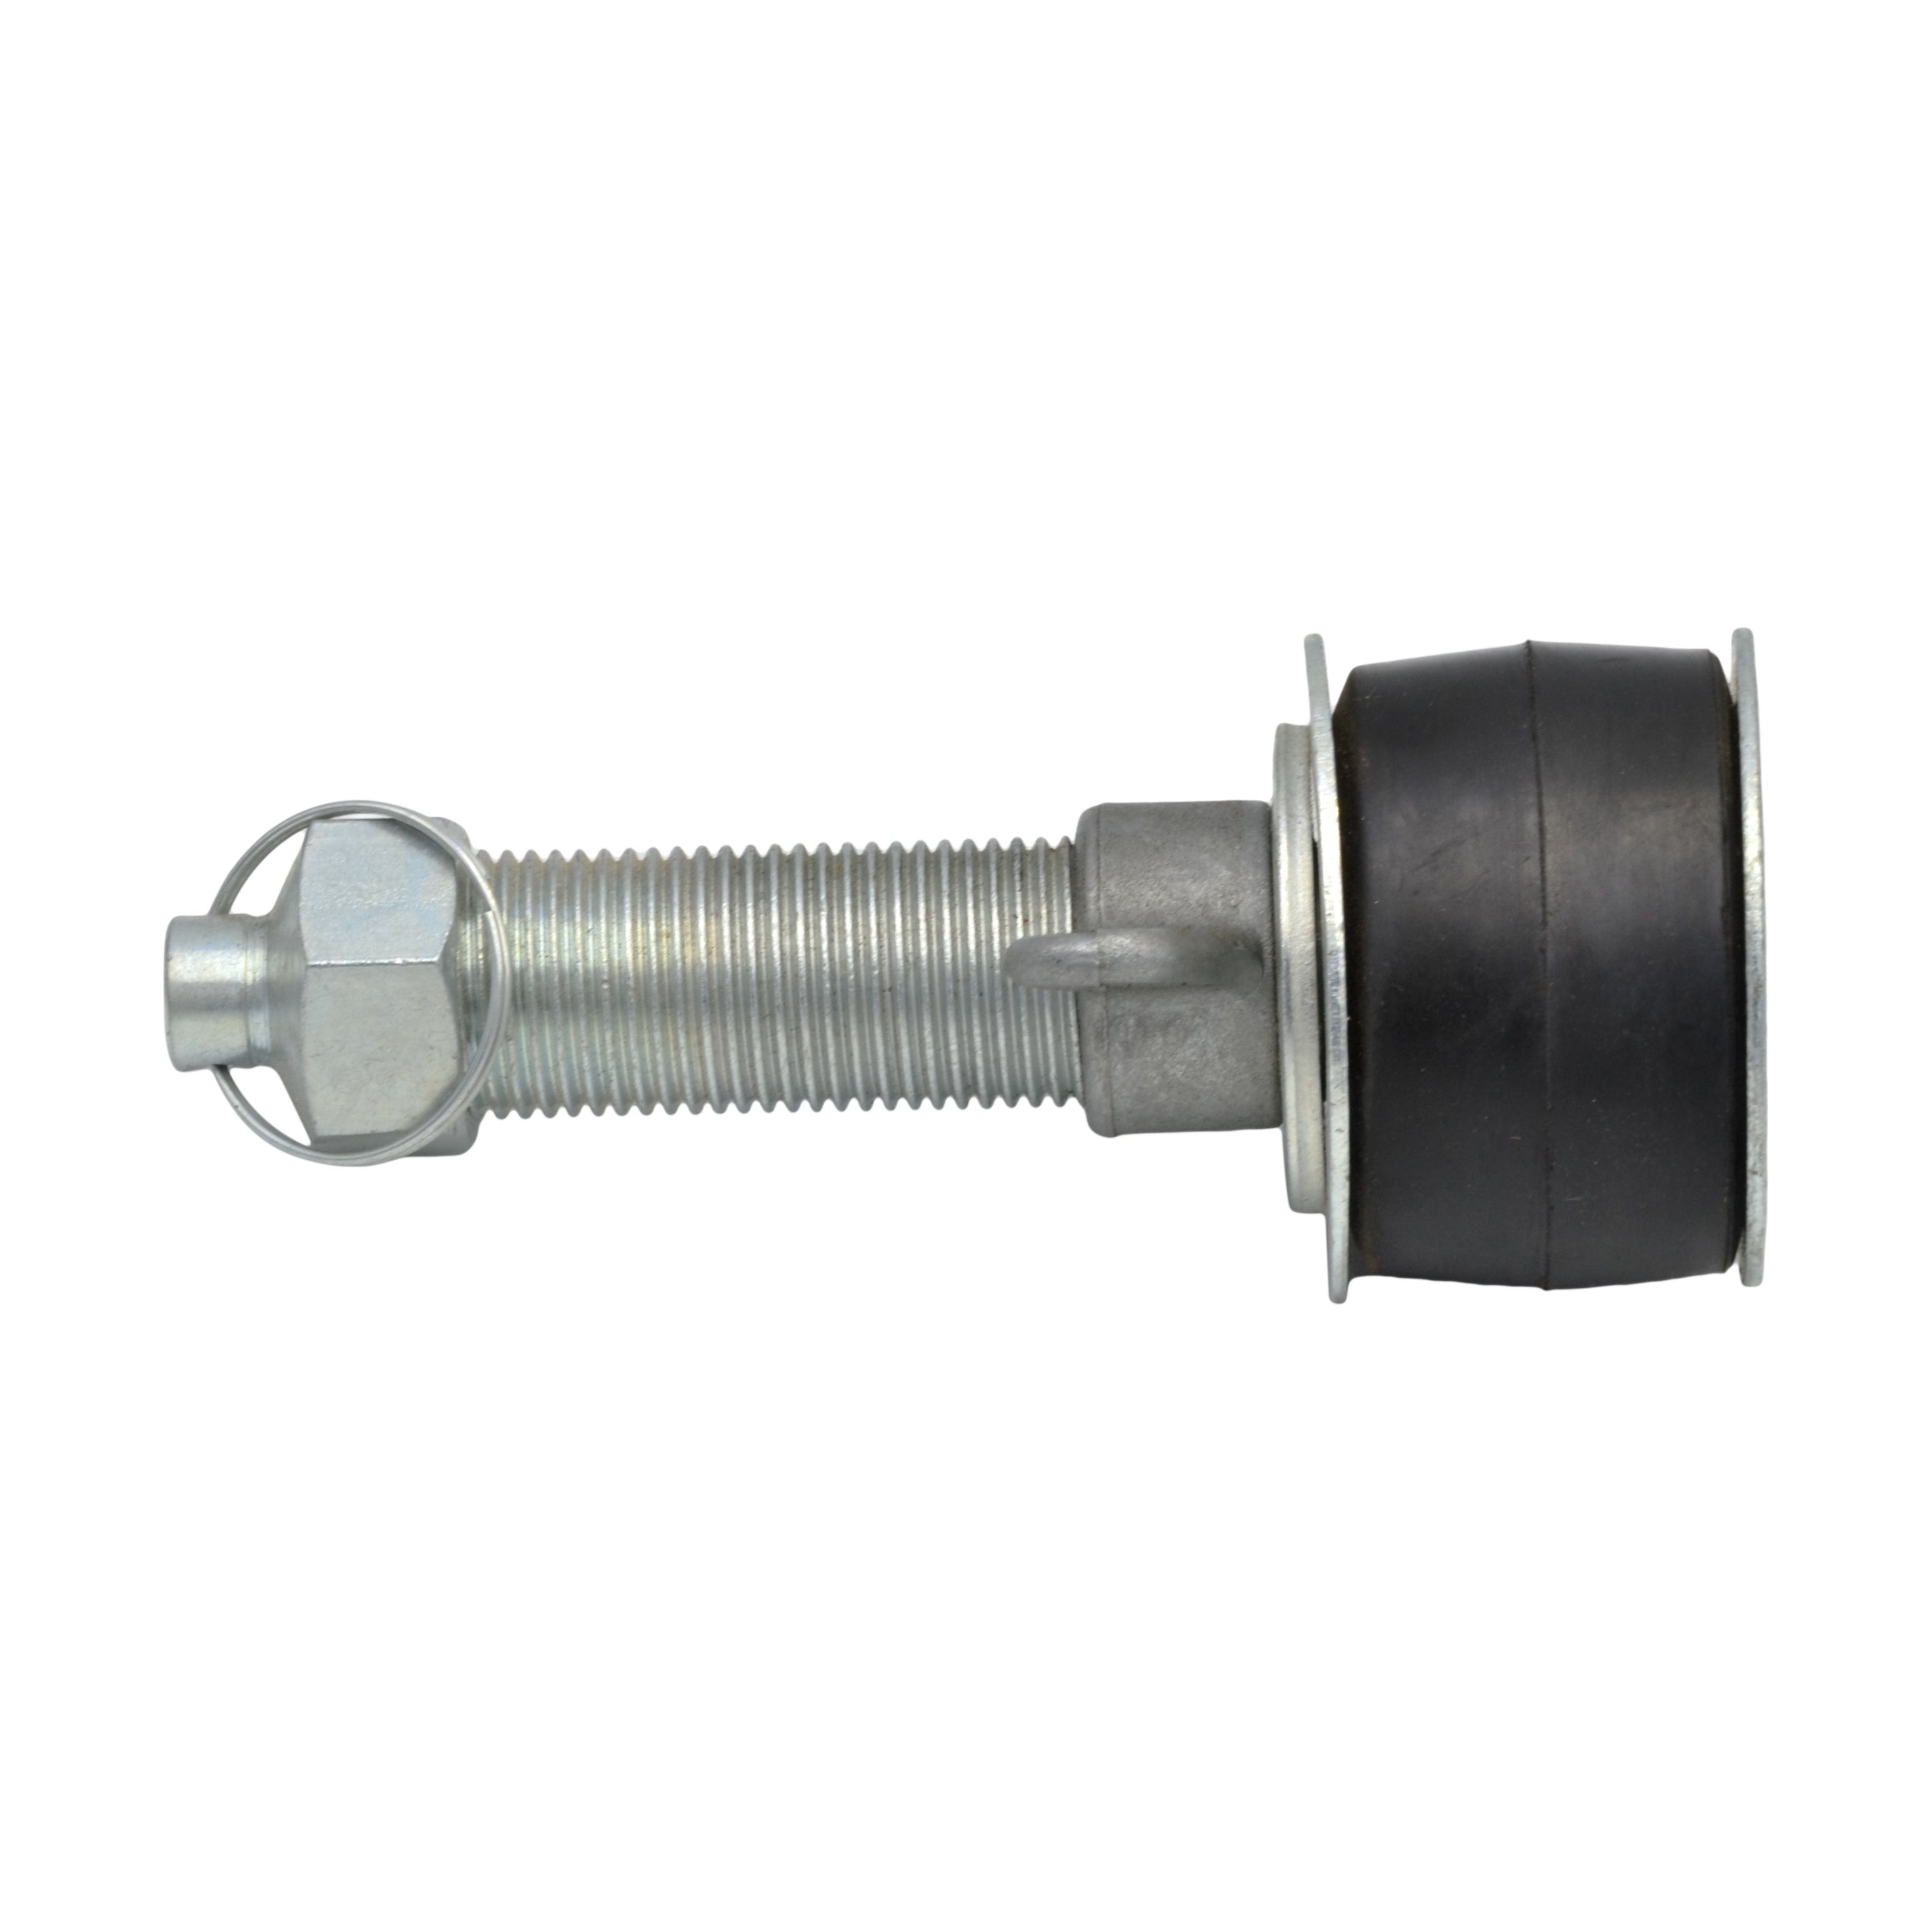 2" 50 mm Steel expanding plug with 1/2 bypass 50-63 mm Range